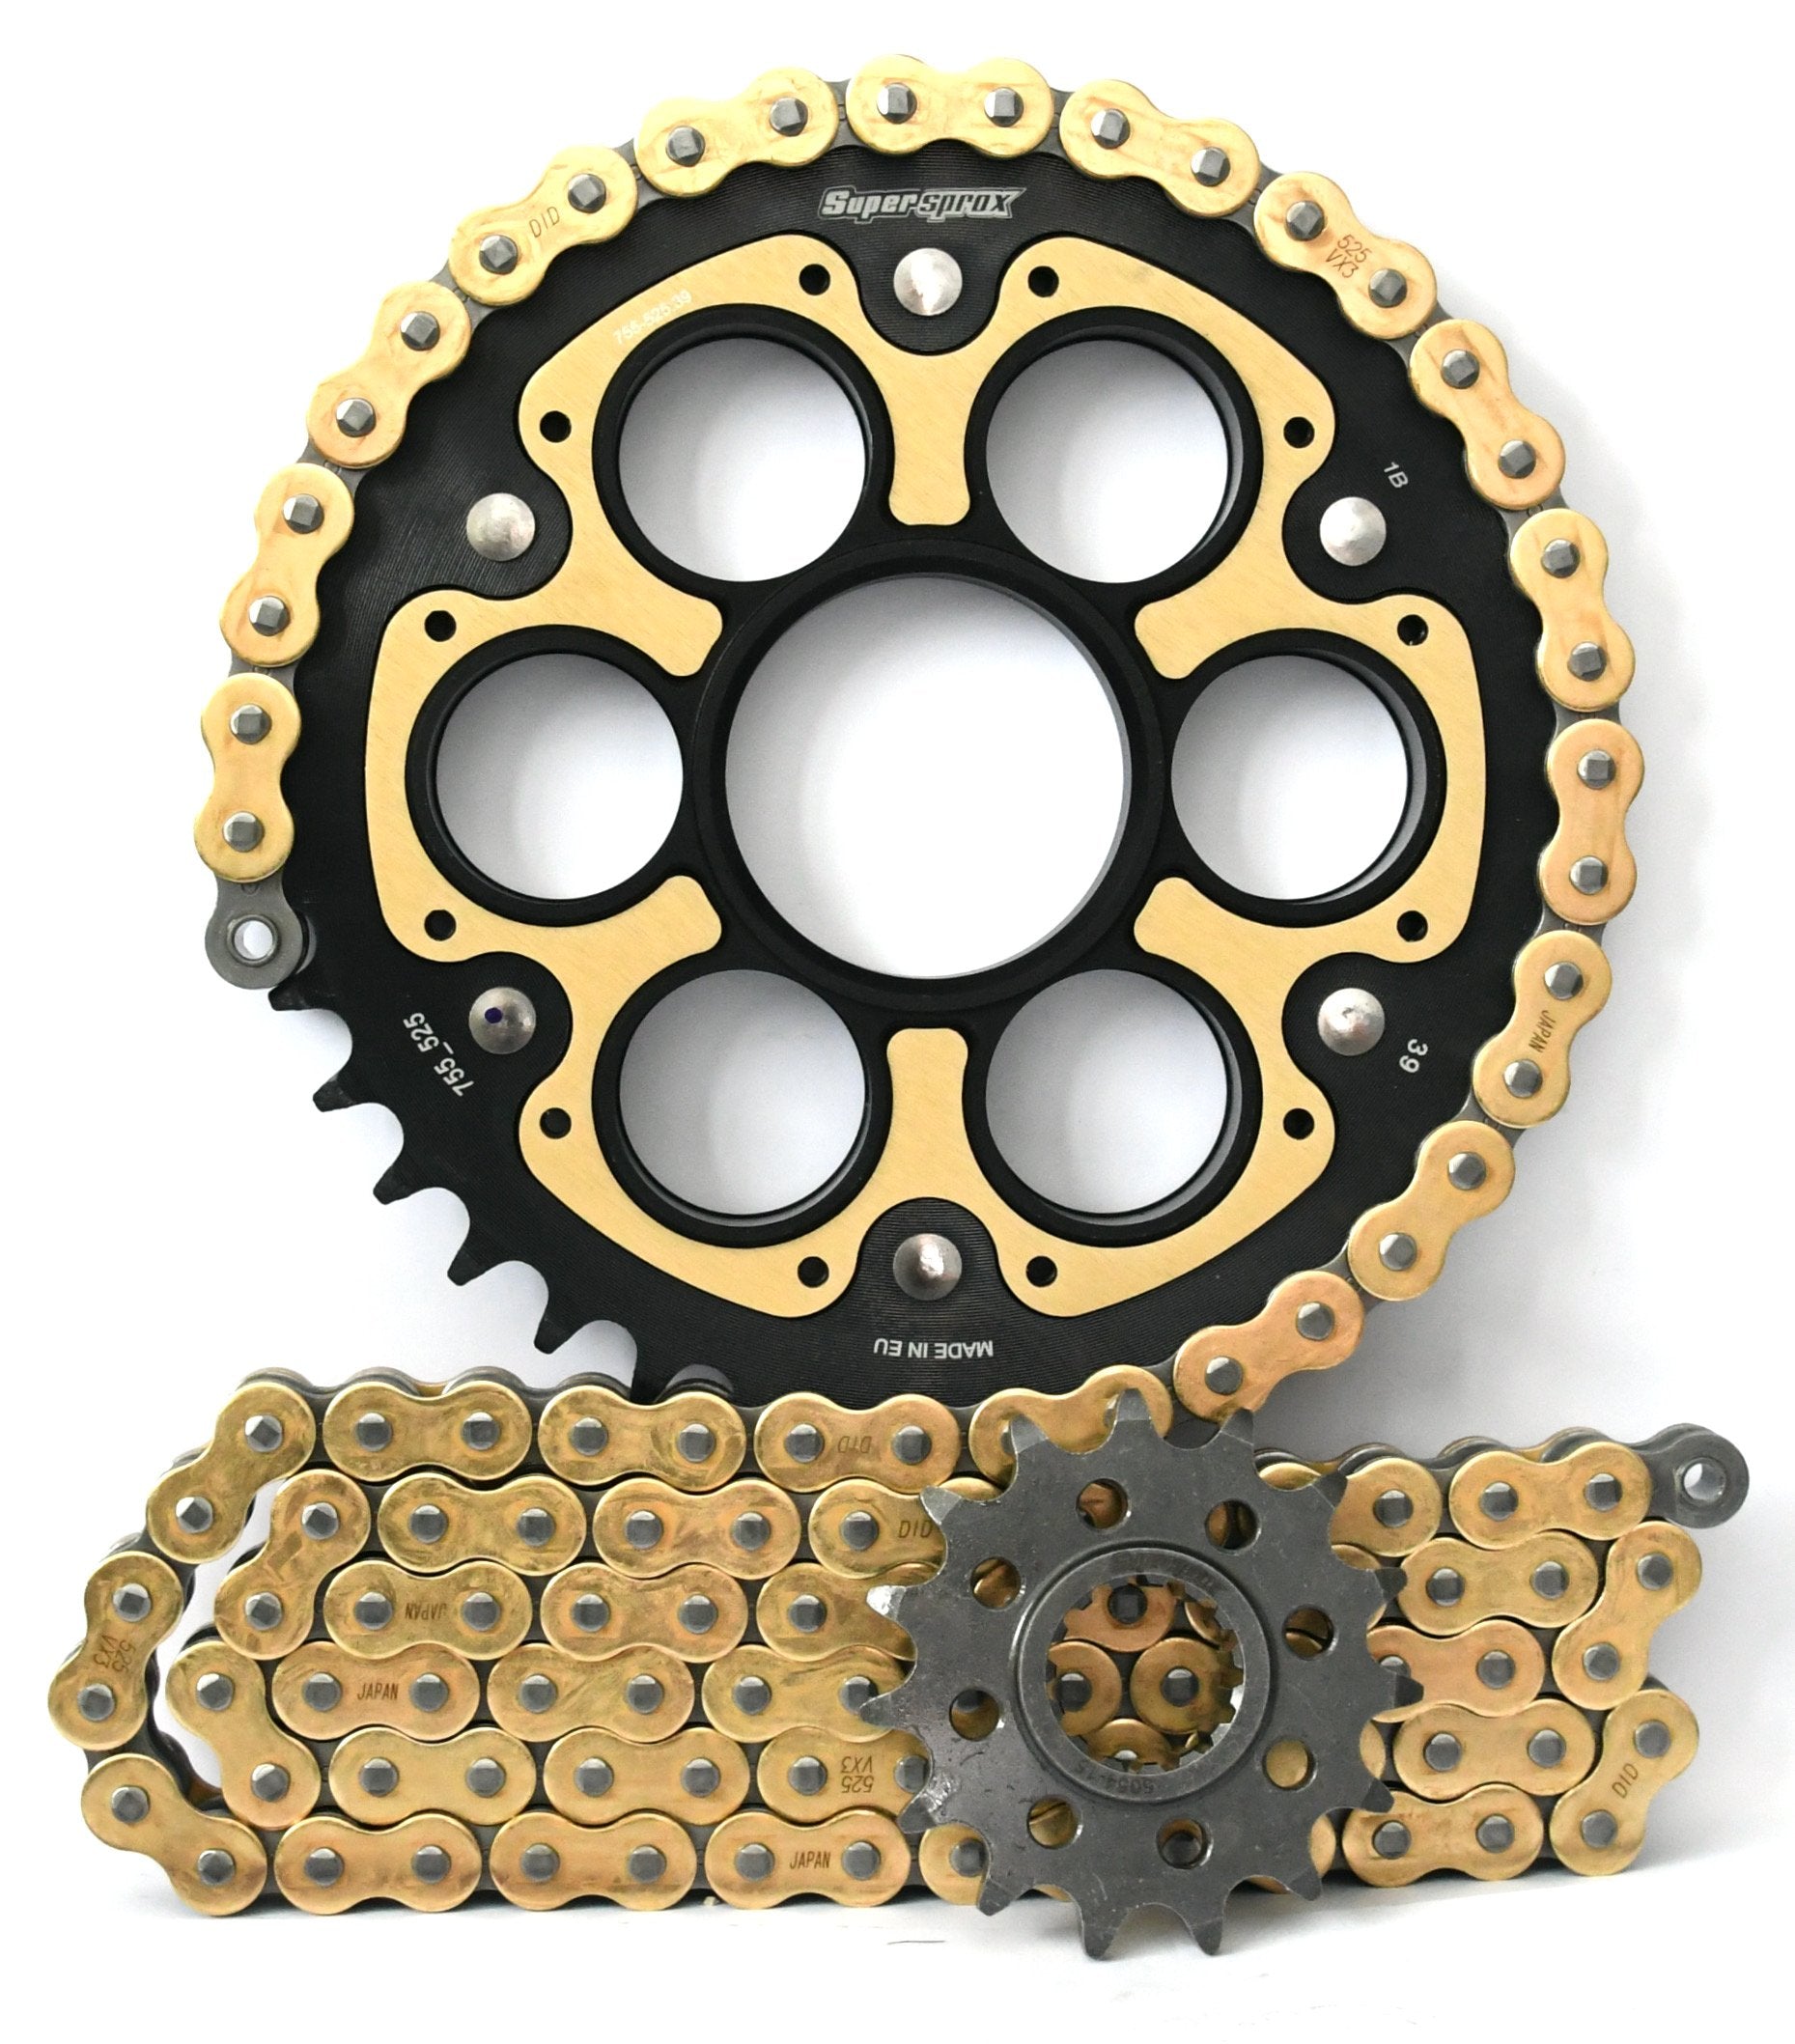 Supersprox Chain & Sprocket Kit for Ducati Diavel 1260 2018> - Standard Gearing